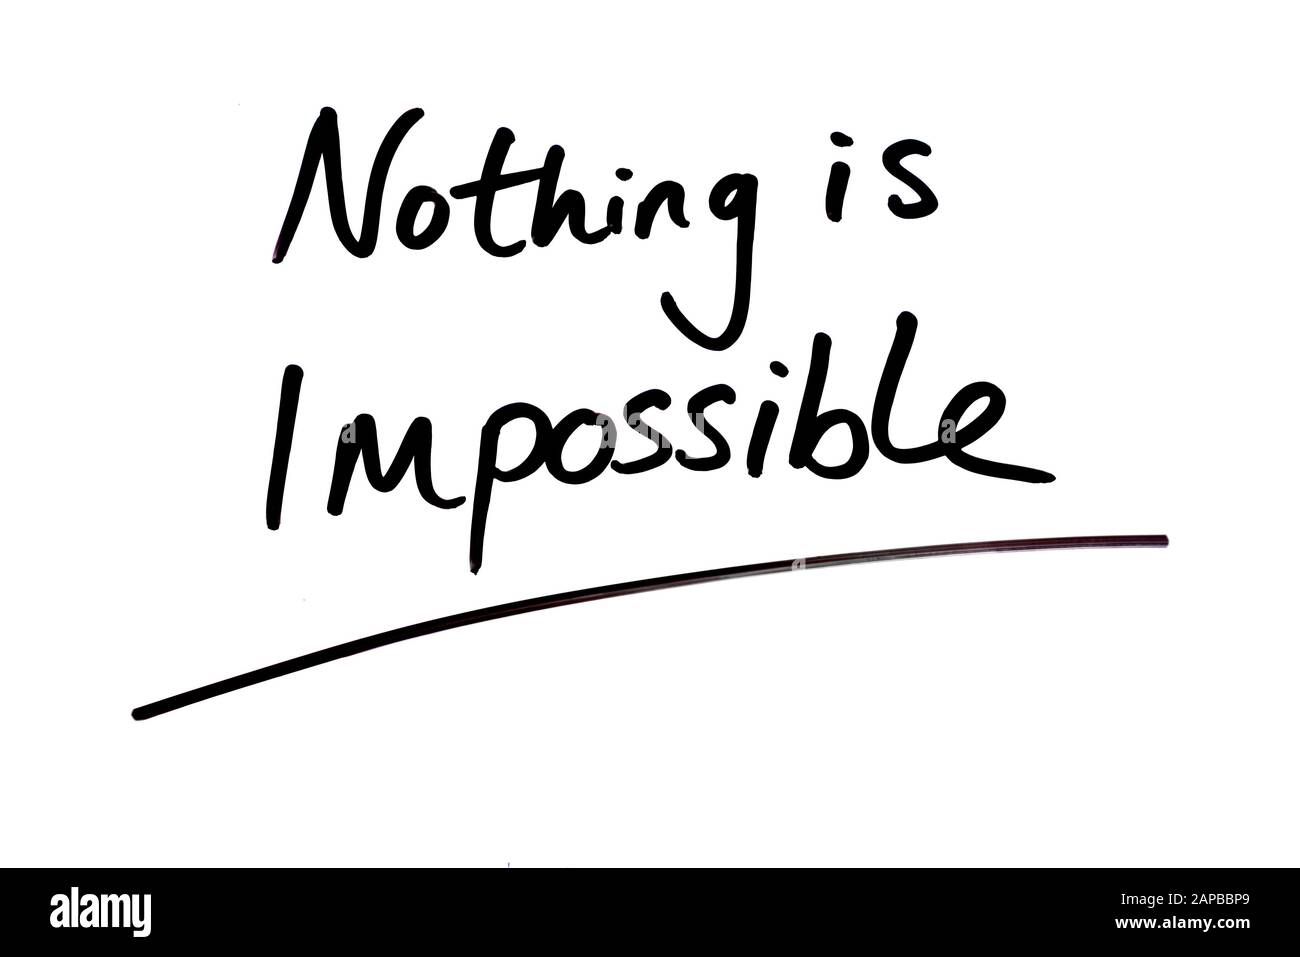 Nothing is Impossible handwritten on a white background. Stock Photo